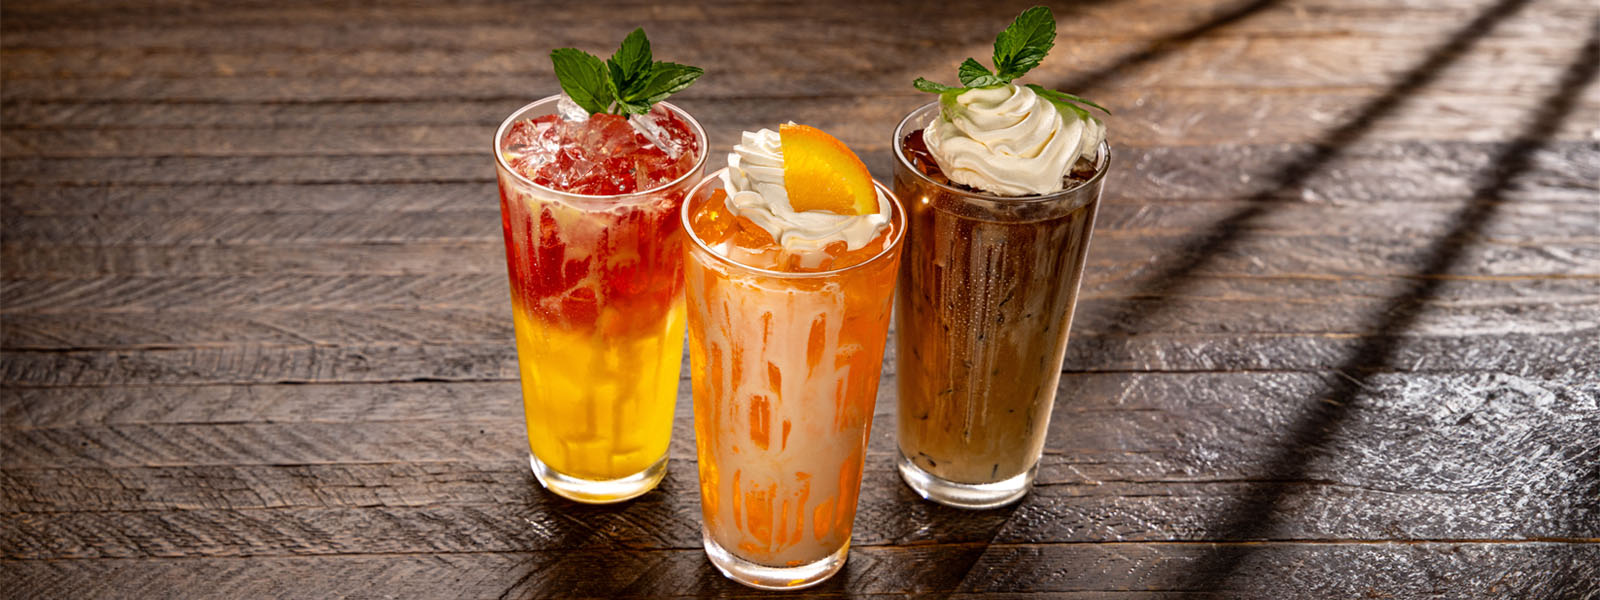 Discover Our New Handcrafted Non-Alcoholic Beverages!